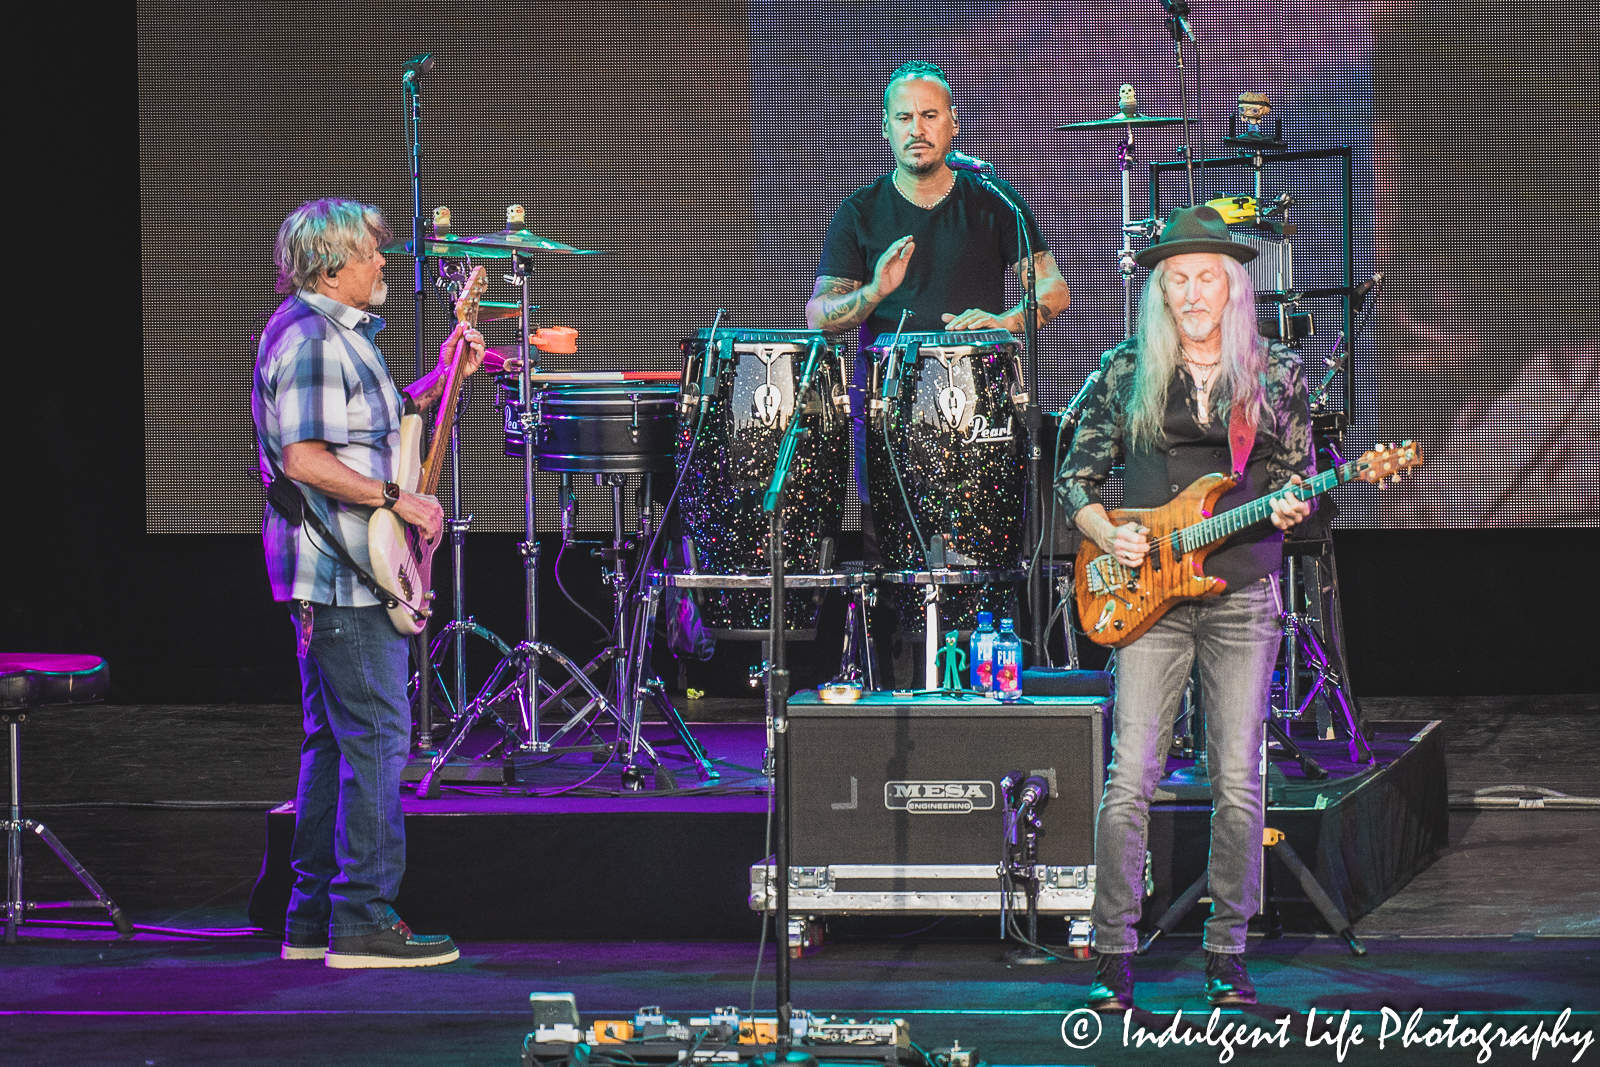 Doobie Brothers founding member Patrick Simmons performing with bass player John Cowan and percussionist Marc Quiñones at Starlight Theatre in Kansas City, MO on June 14, 2023.